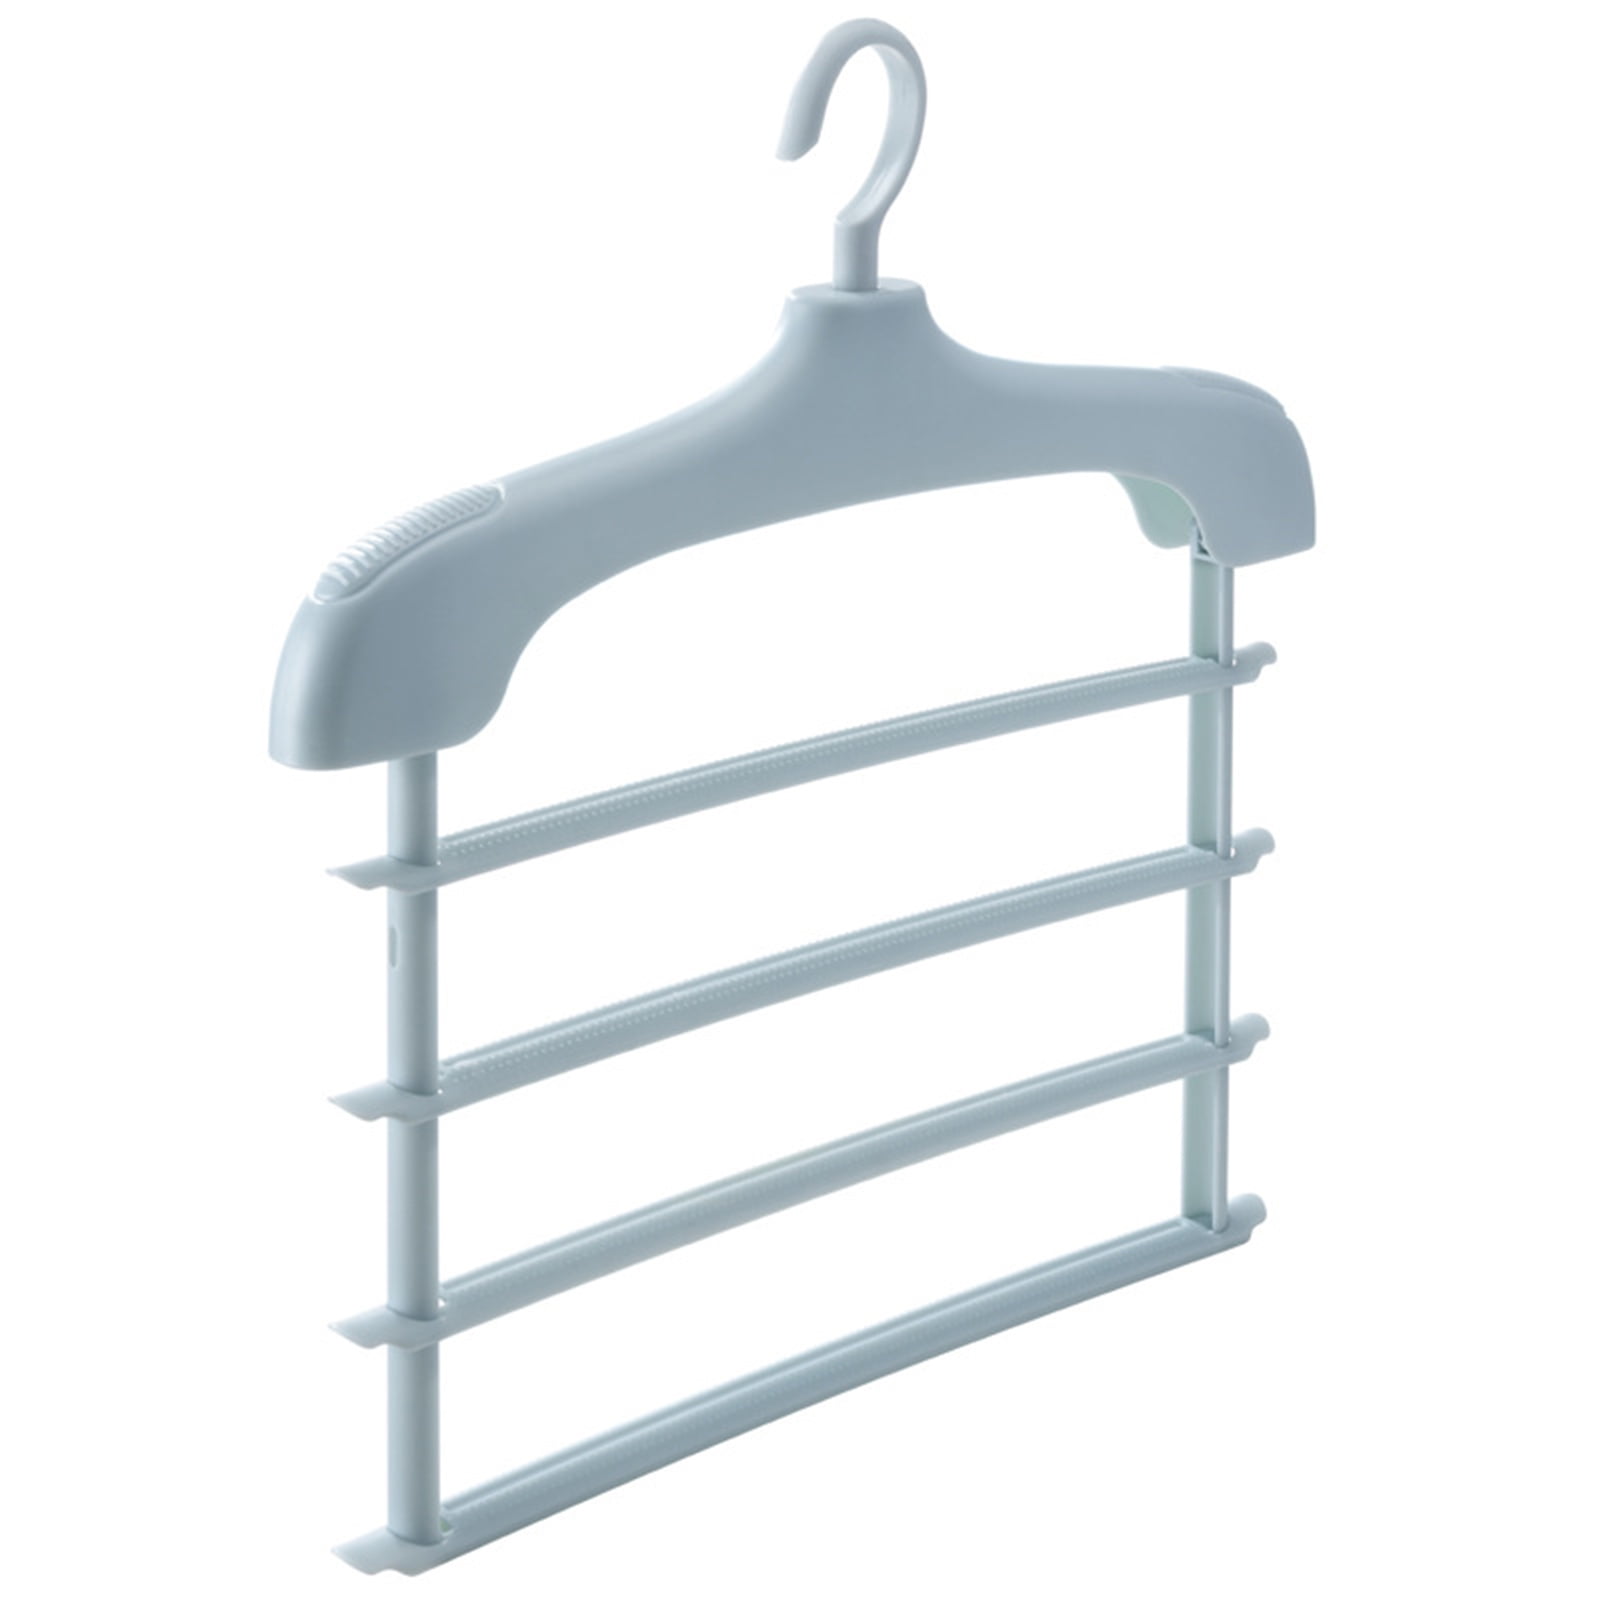 Details about   1pc Useful Practical Durable Scarf Rack Pants Organizer for Wardrobe Home Closet 